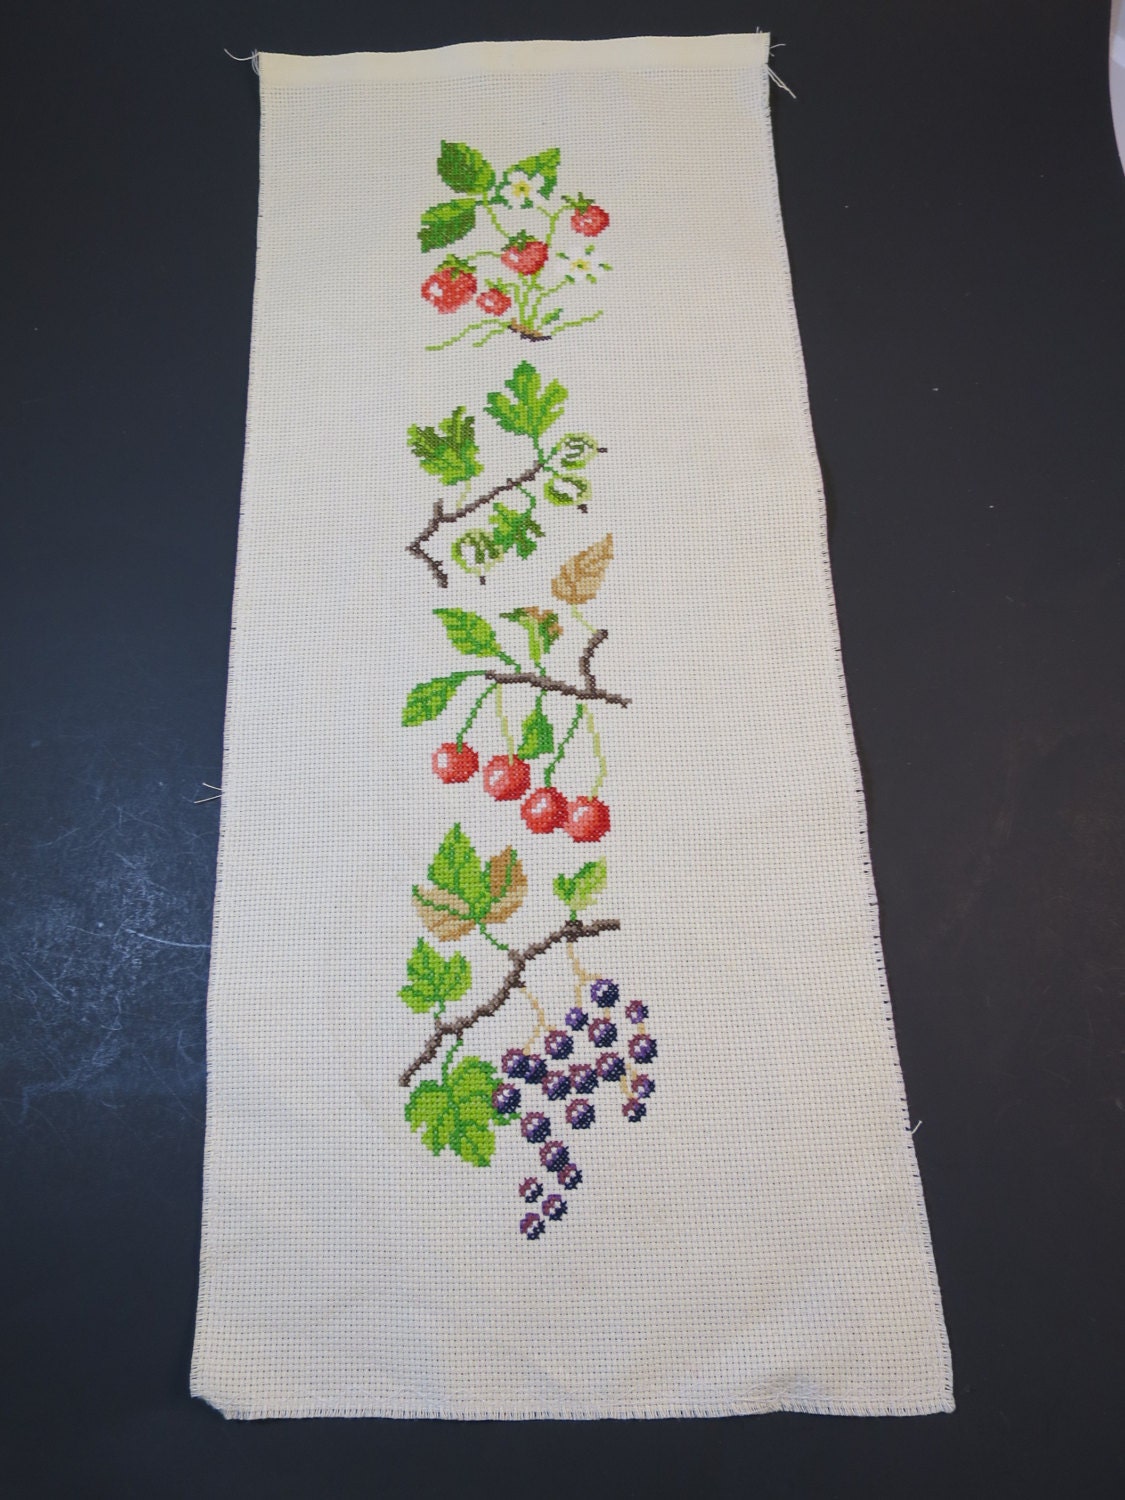 Fruit Bell Pull Finished Cross Stitch Panel Vertical Fruit Design on